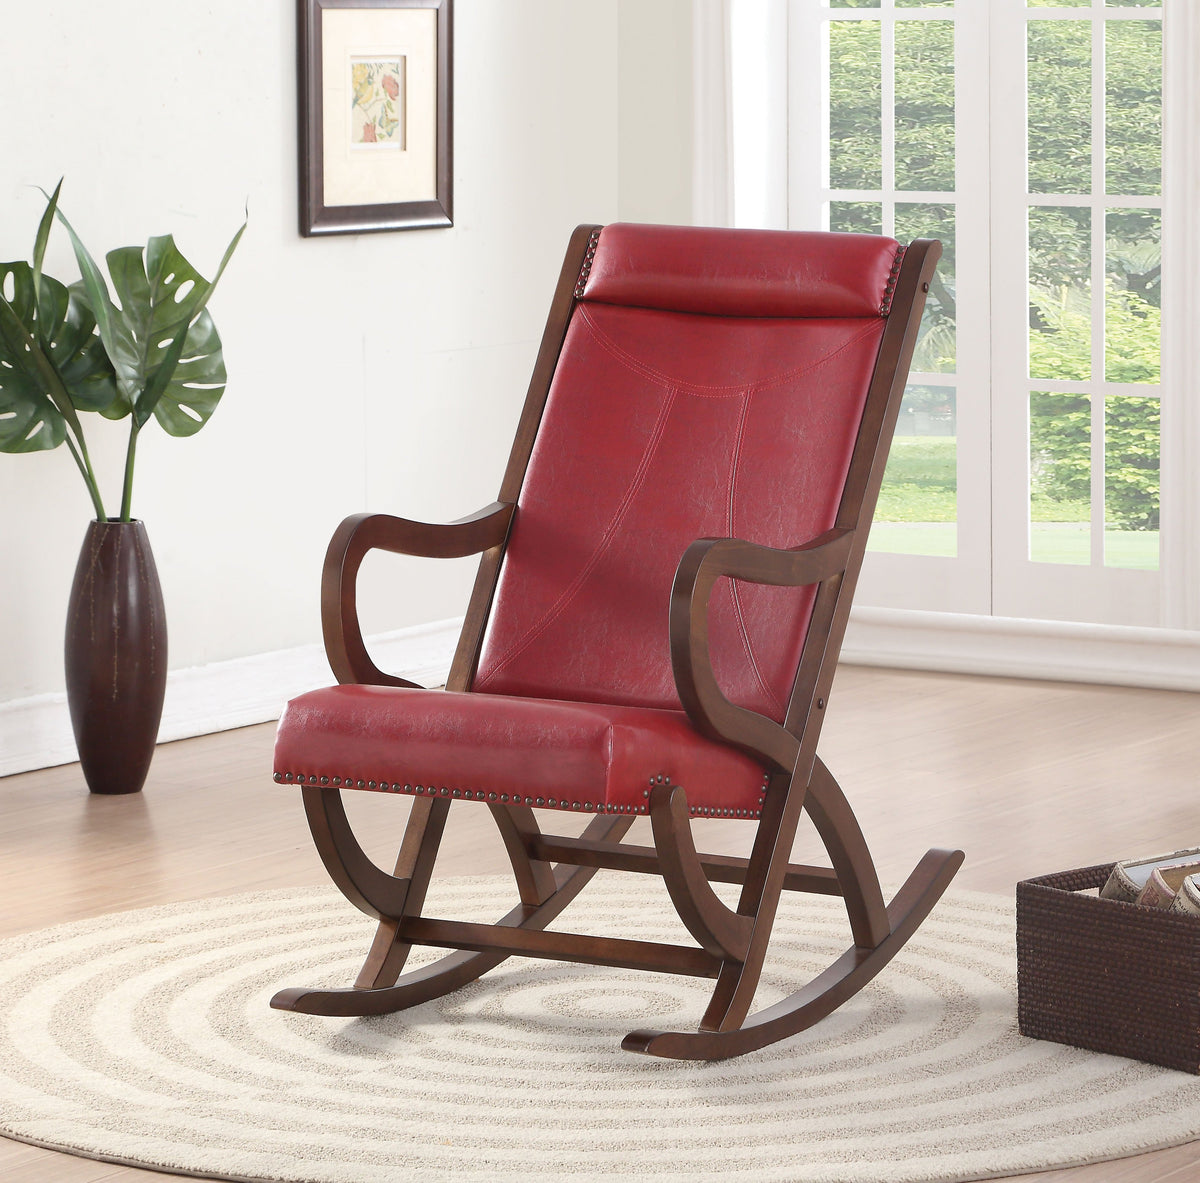 BM193887 -Faux Leather Upholstered Wooden Rocking Chair with Looped Arms, Brown and Red